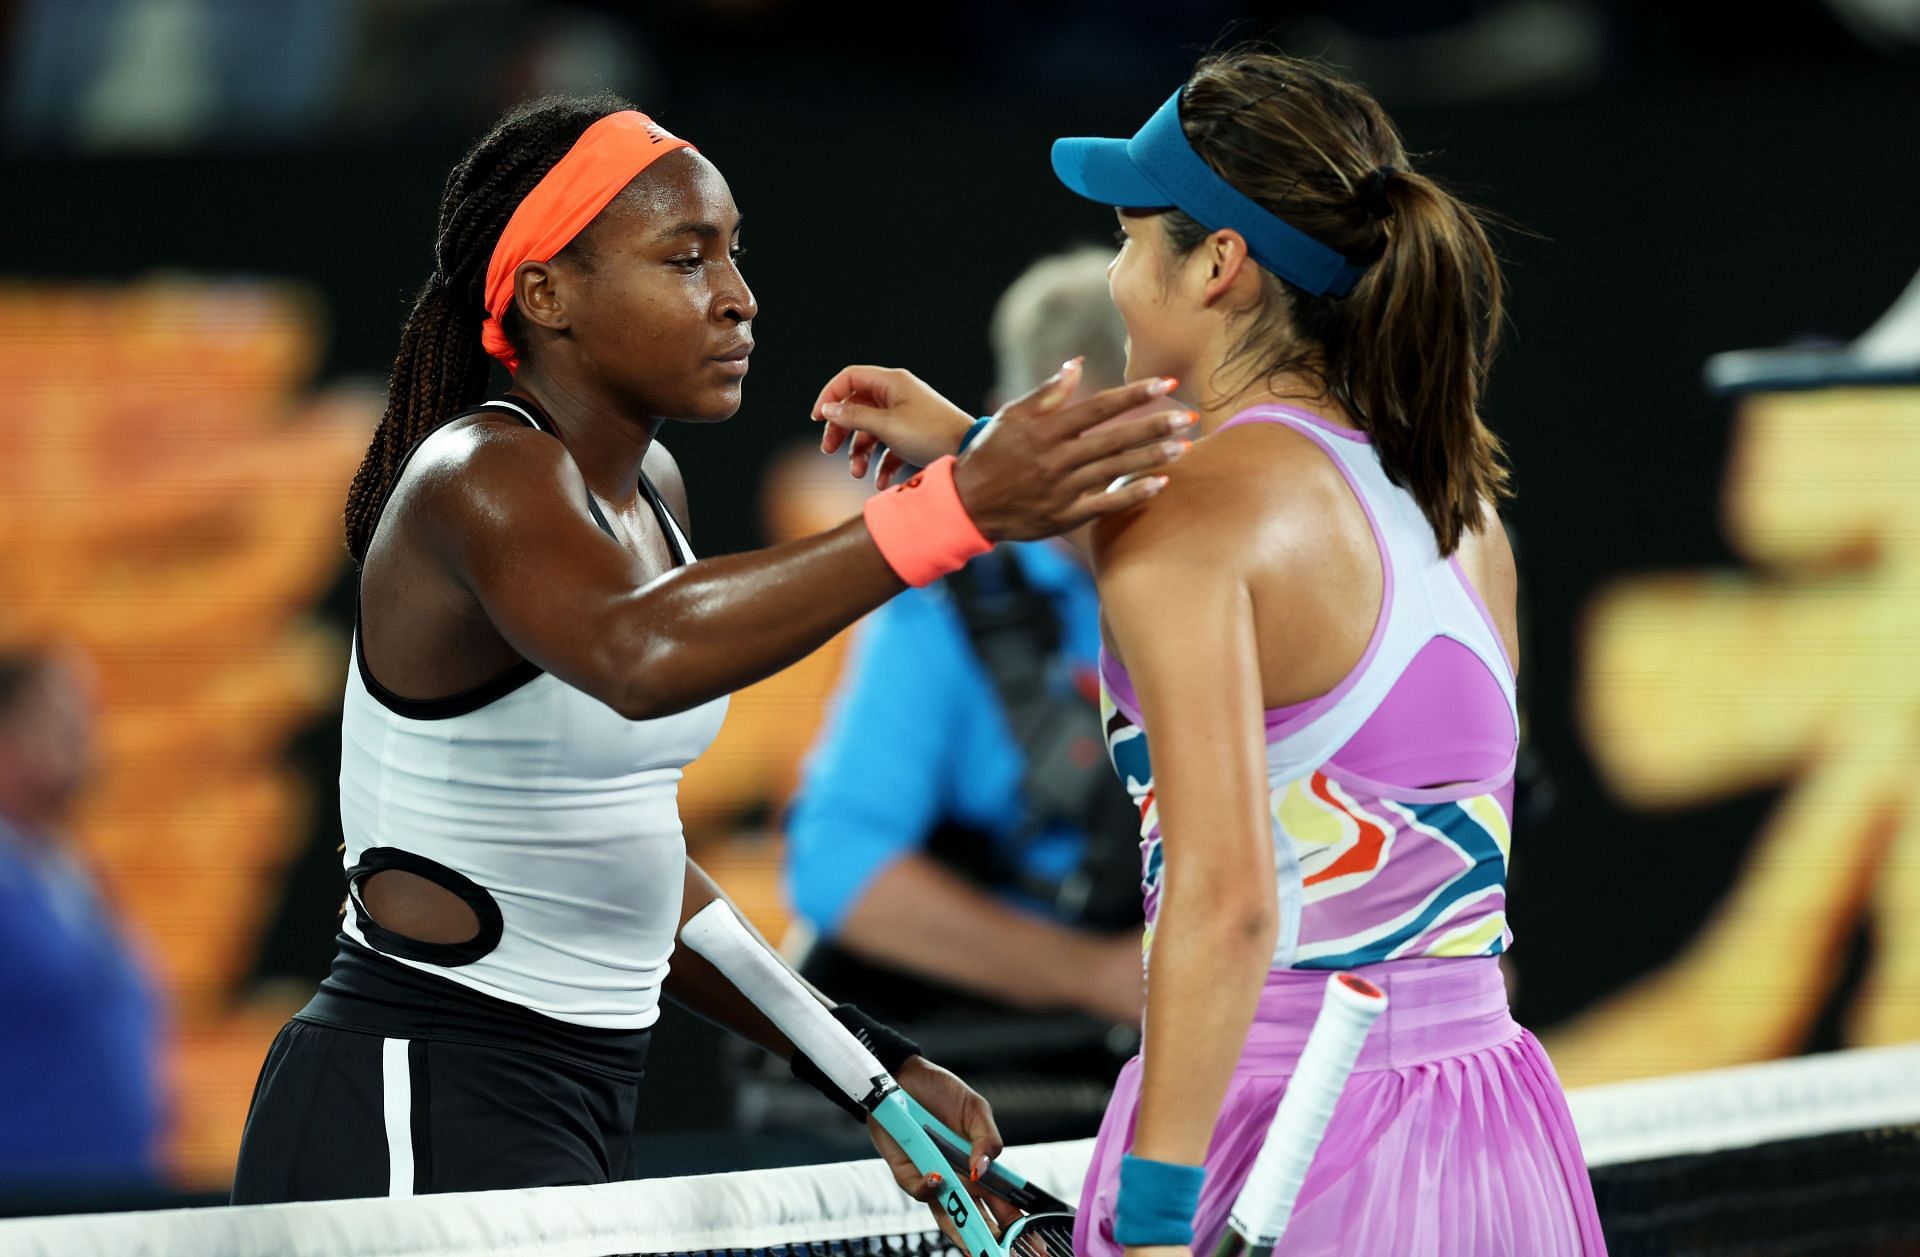 Coco Gauff and Emma Raducanu pictured at the 2023 Australian Open - Day 3.